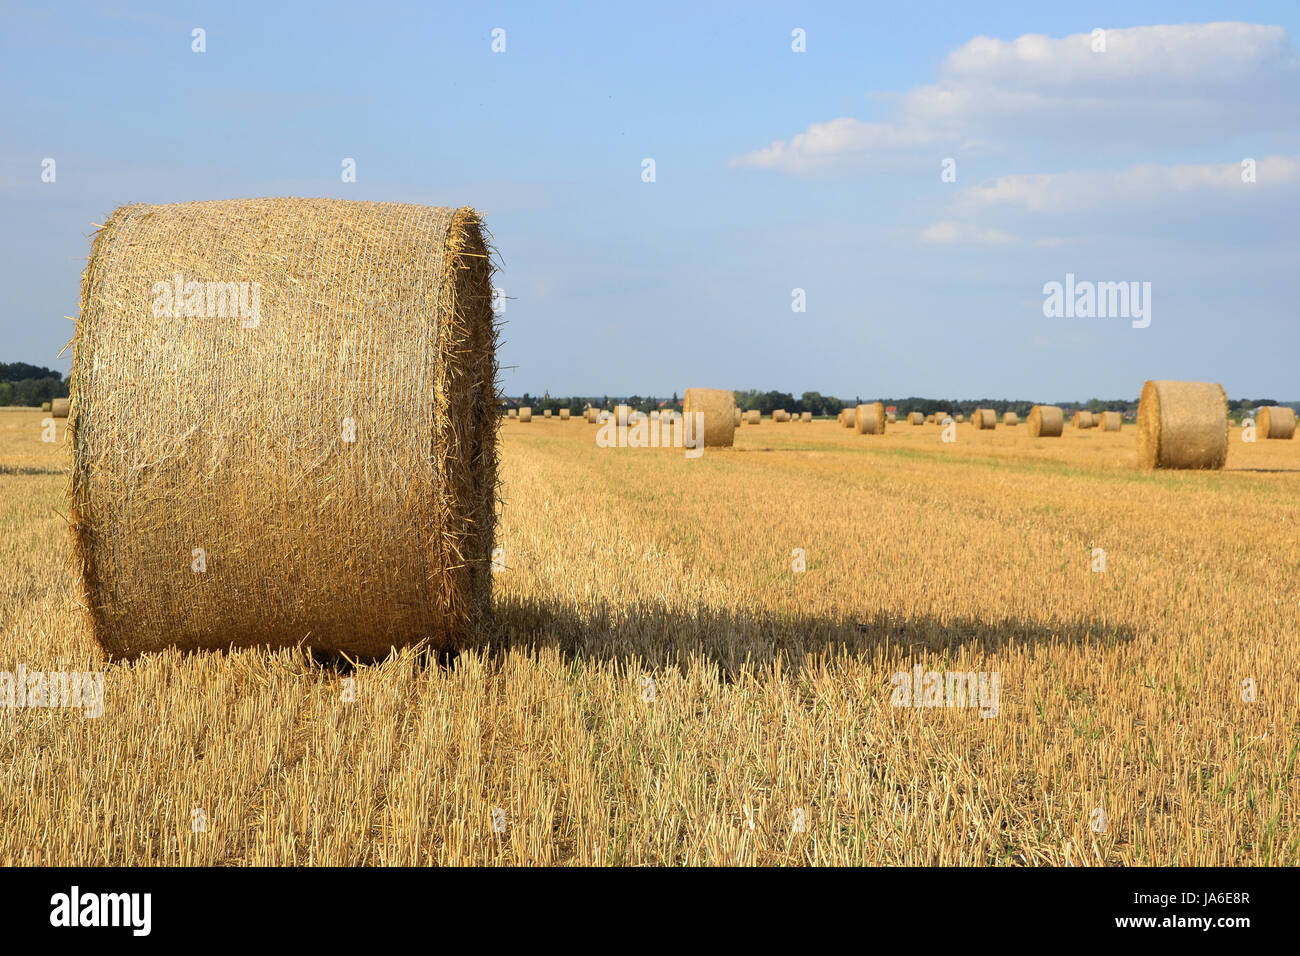 Courtyard Farm Hay Straw High Resolution Stock Photography and Images -  Alamy